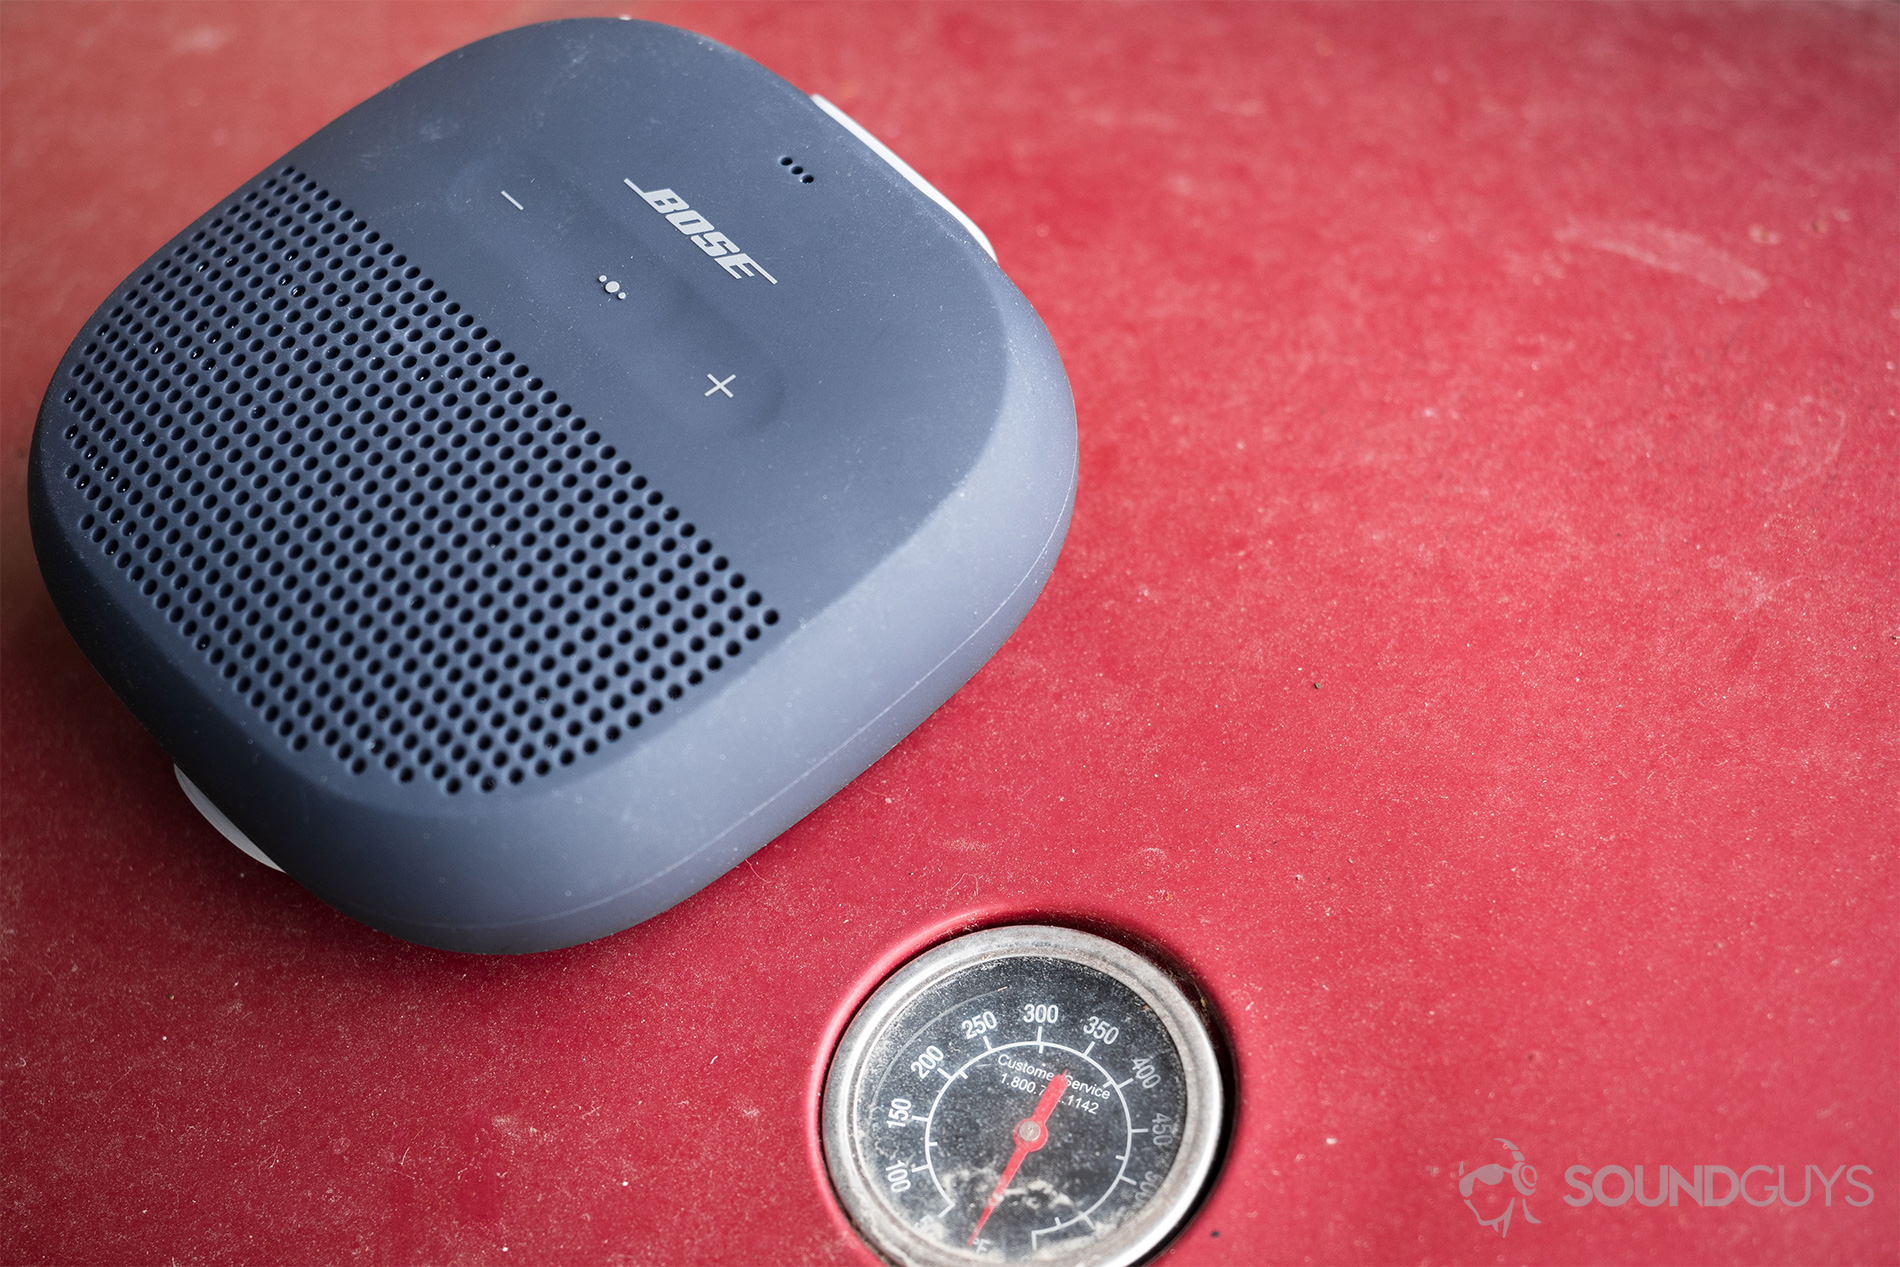 Bose SoundLink Micro on a red grill with the thermometer showing.